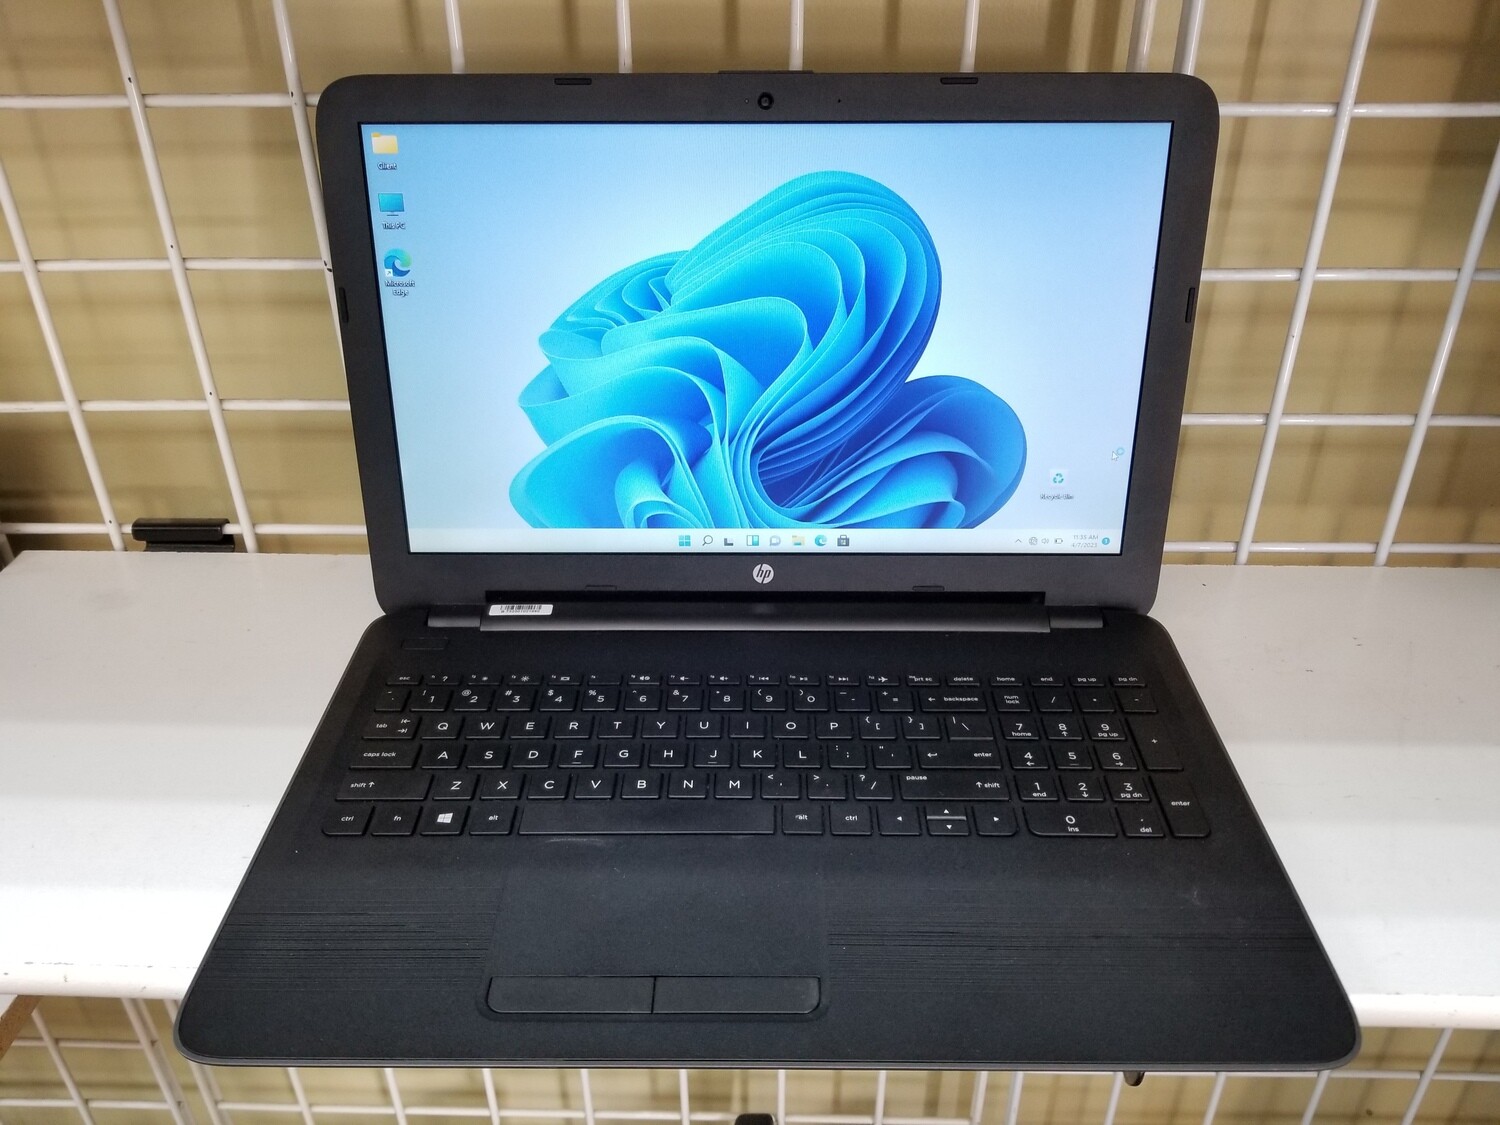 HP 250 G5 Laptop 15.6" Intel Core i3-6006U@2.00GHz, 4GB RAM 500GB HDD,  1366x768, Window 11 Pro, Intel HD Graphics - Store - Sell Your Macbook Pro,  Sell Your Cell Phone, Sell Your Computer